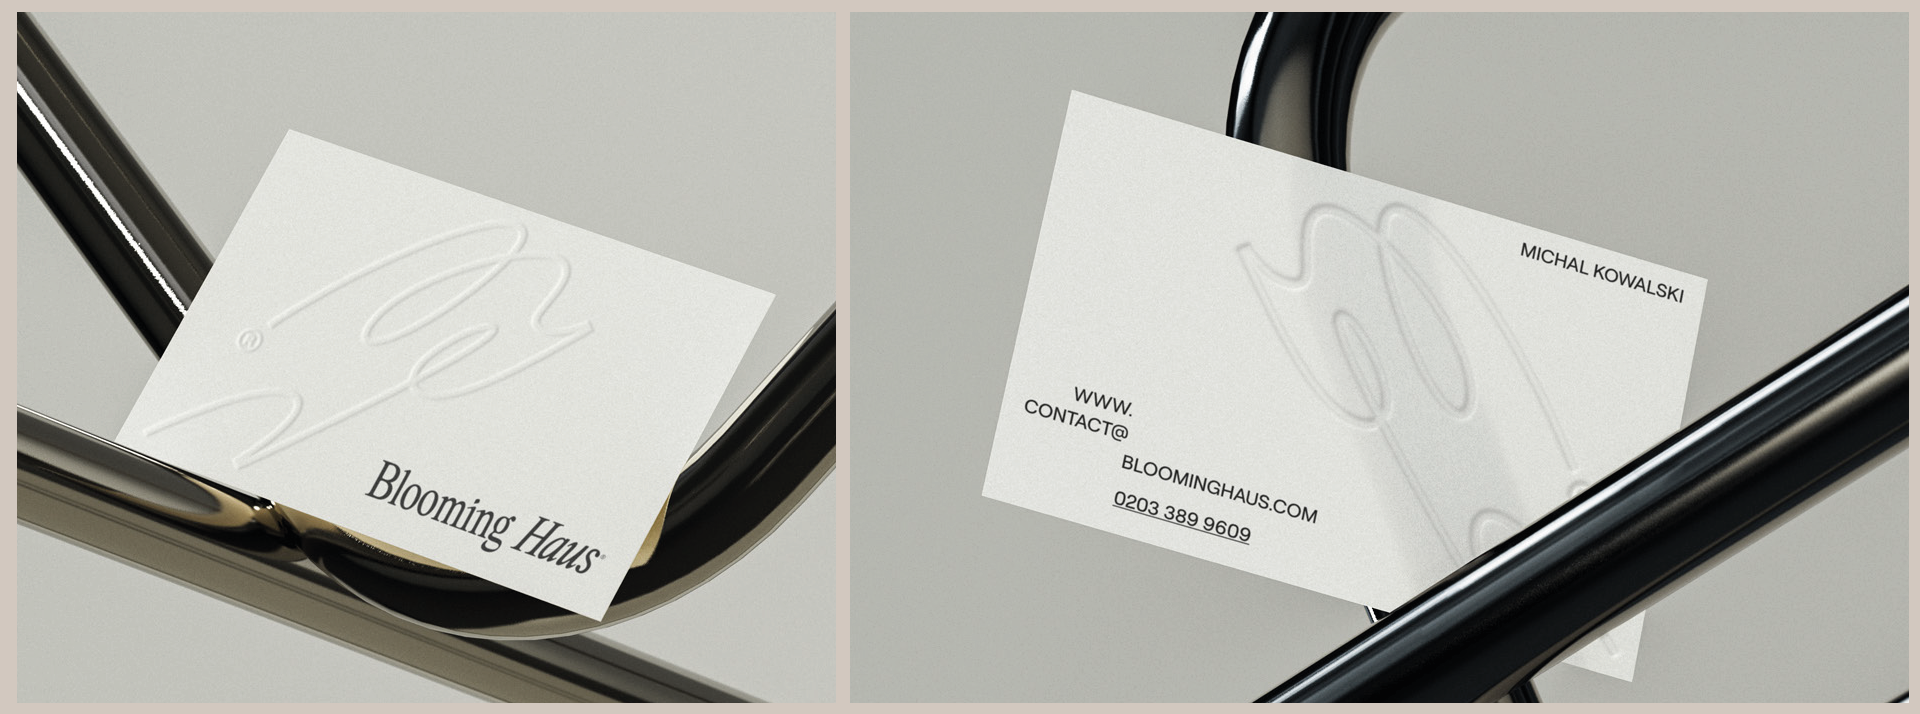 Business card for blooming haus flowers.